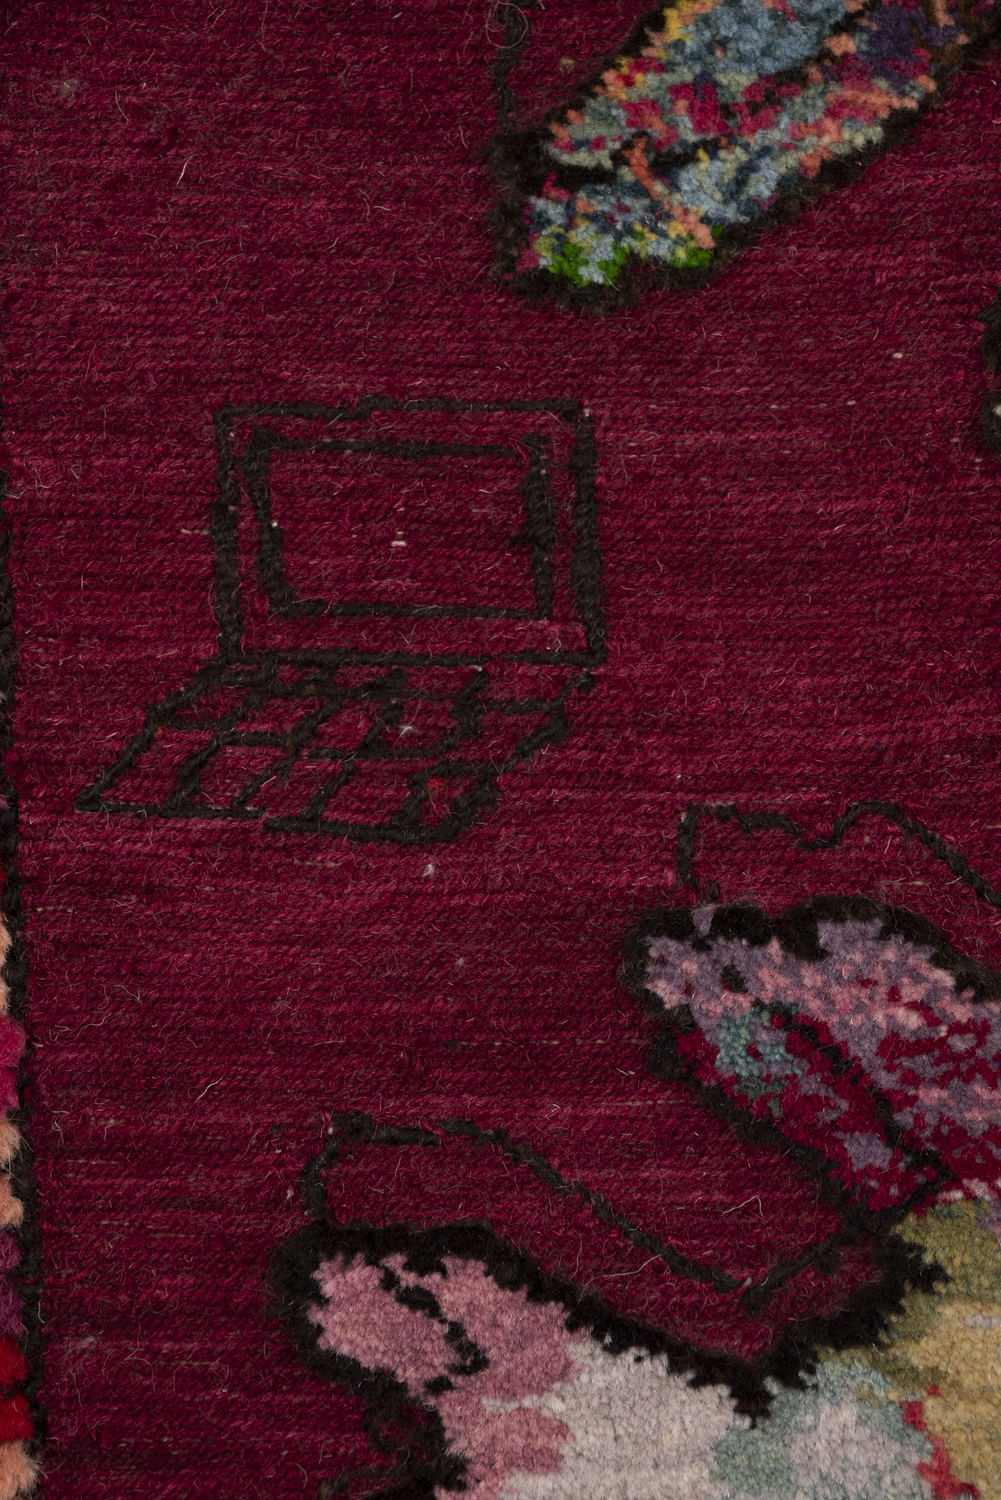 Araks Sahakyan & Rebecca Topakian, Vordan Karmir (detail), 2022, Handwoven rug, made in Tsovagyugh, Armenia, Natural wool, natural and non natural dyes, 100 x 170 cm 
With the support of Bourse Transverse - ADAGP, FreeLens and Sometimes Éditions.